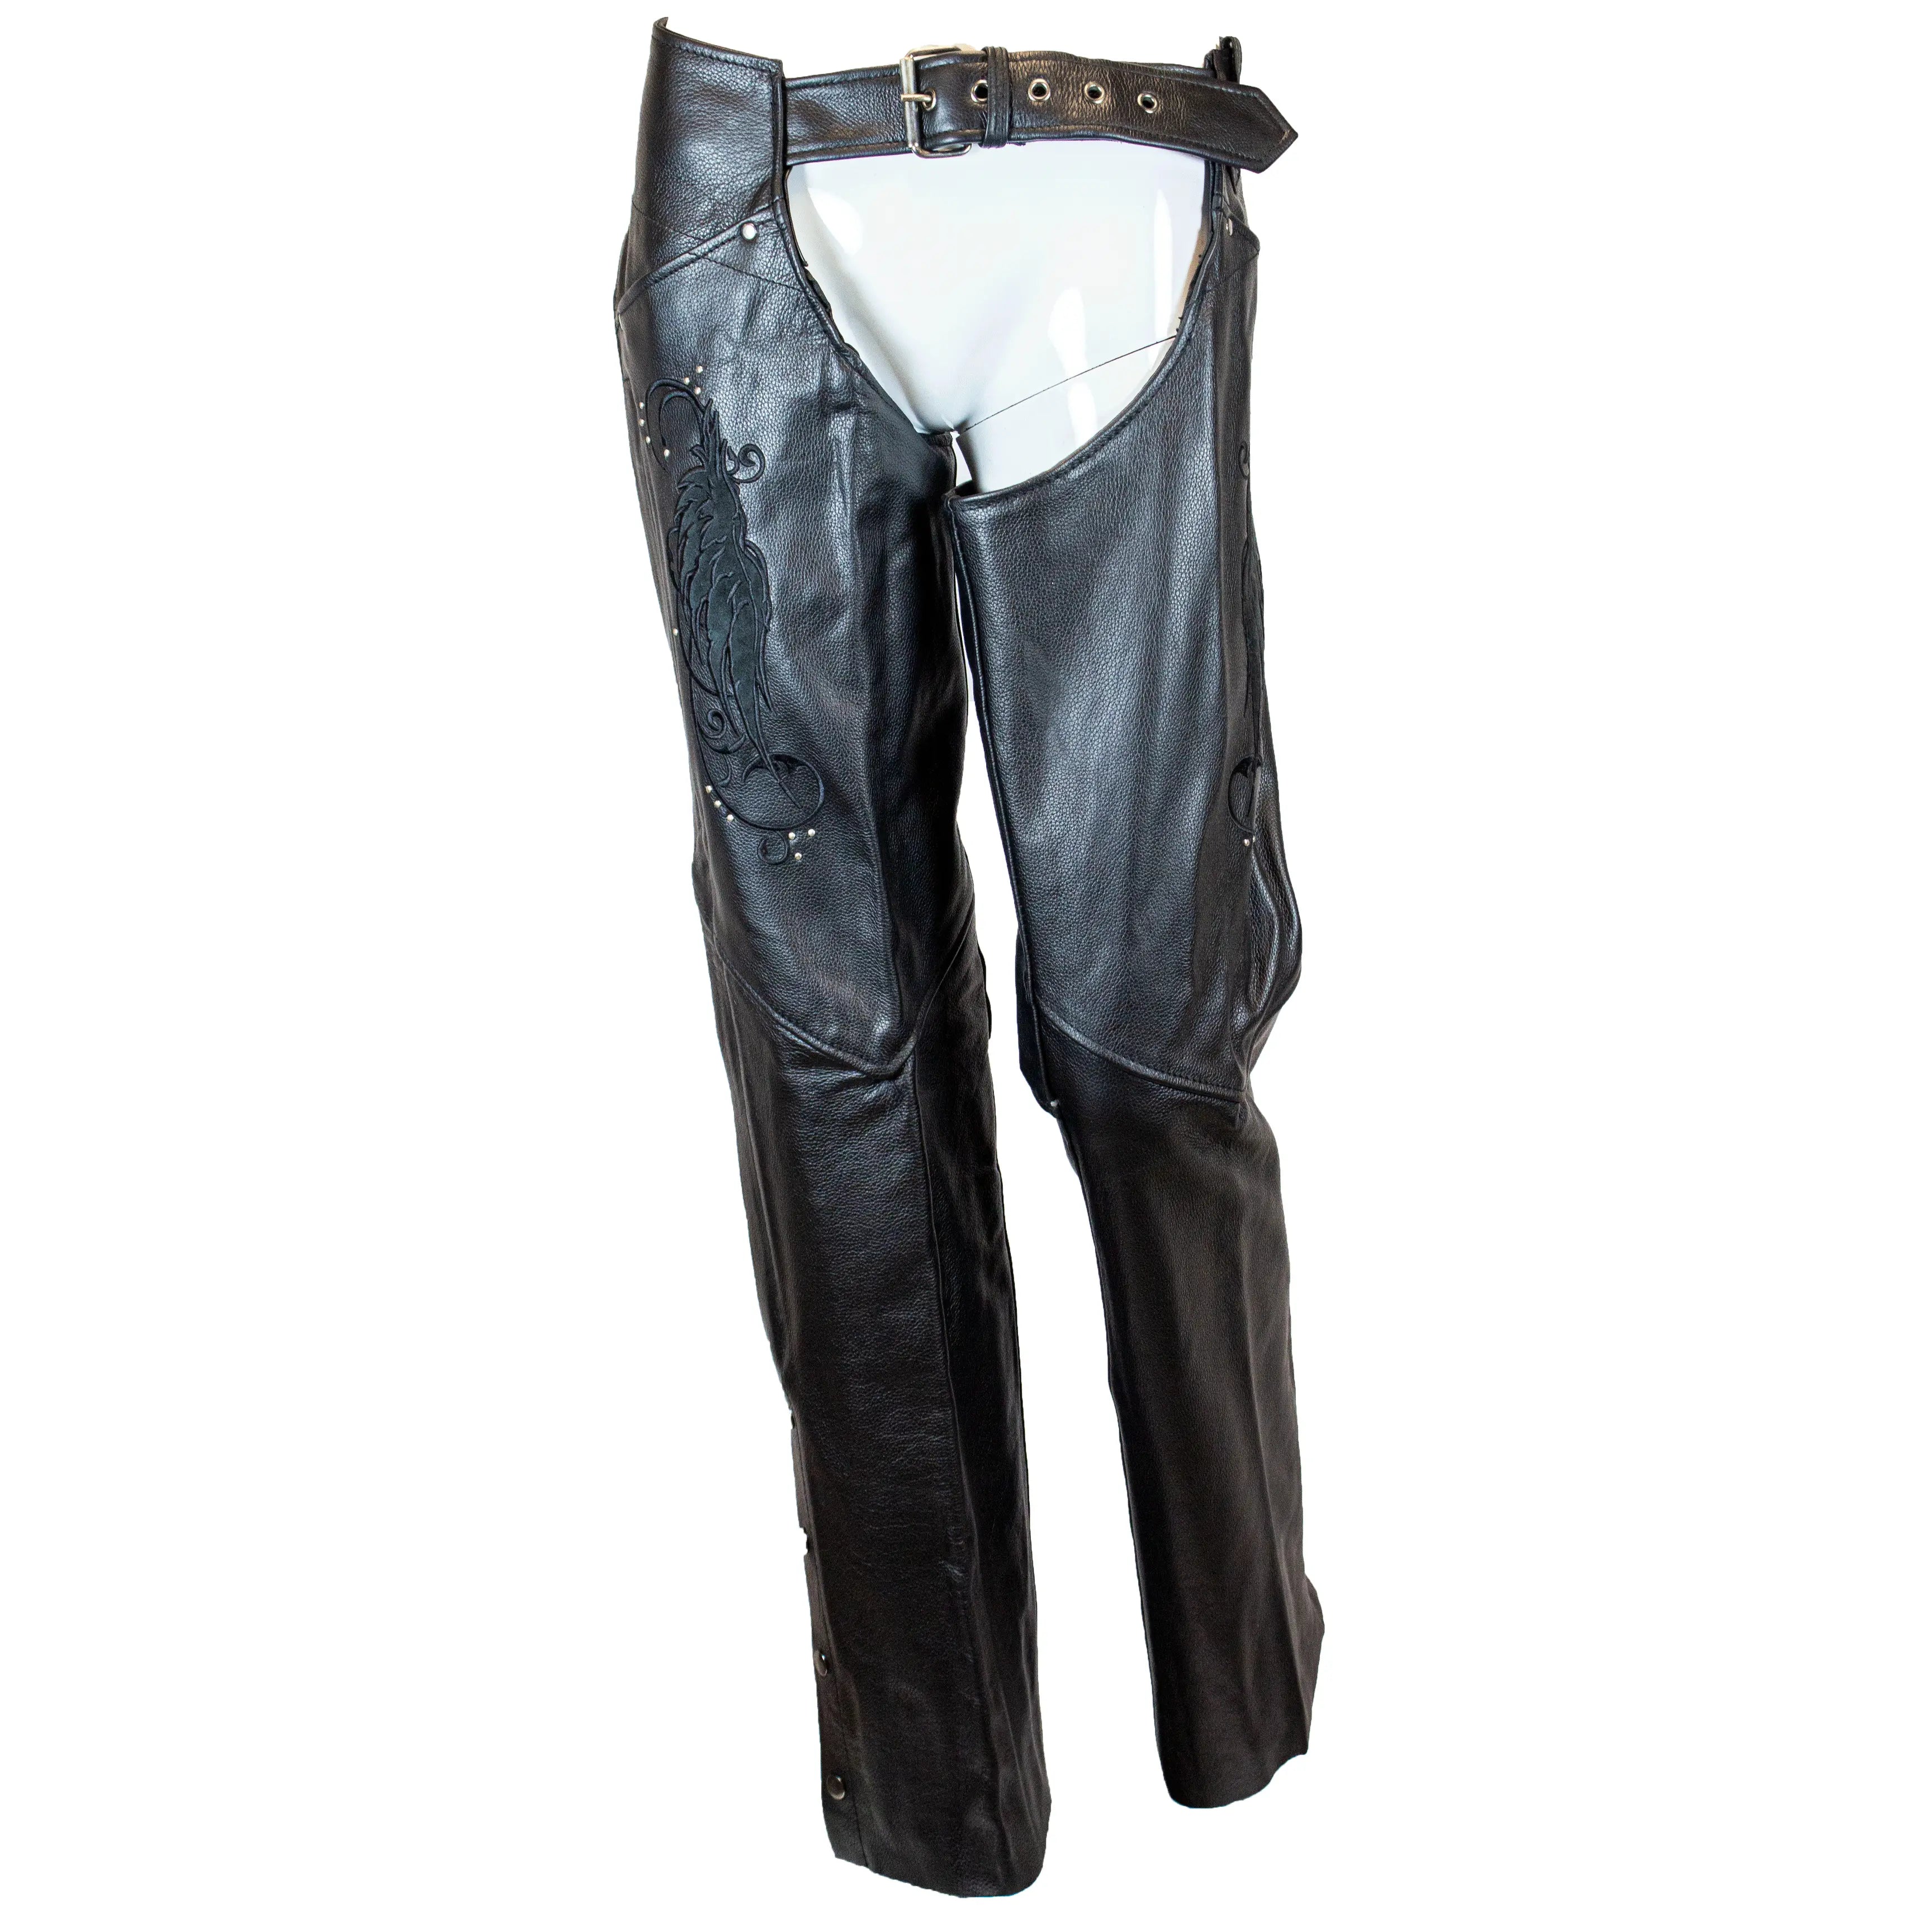 BOL/Open Road Women's Suede Wing Design Leather Chaps Women's Motorcycle Pants & Chaps Boutique of Leathers/Open Road